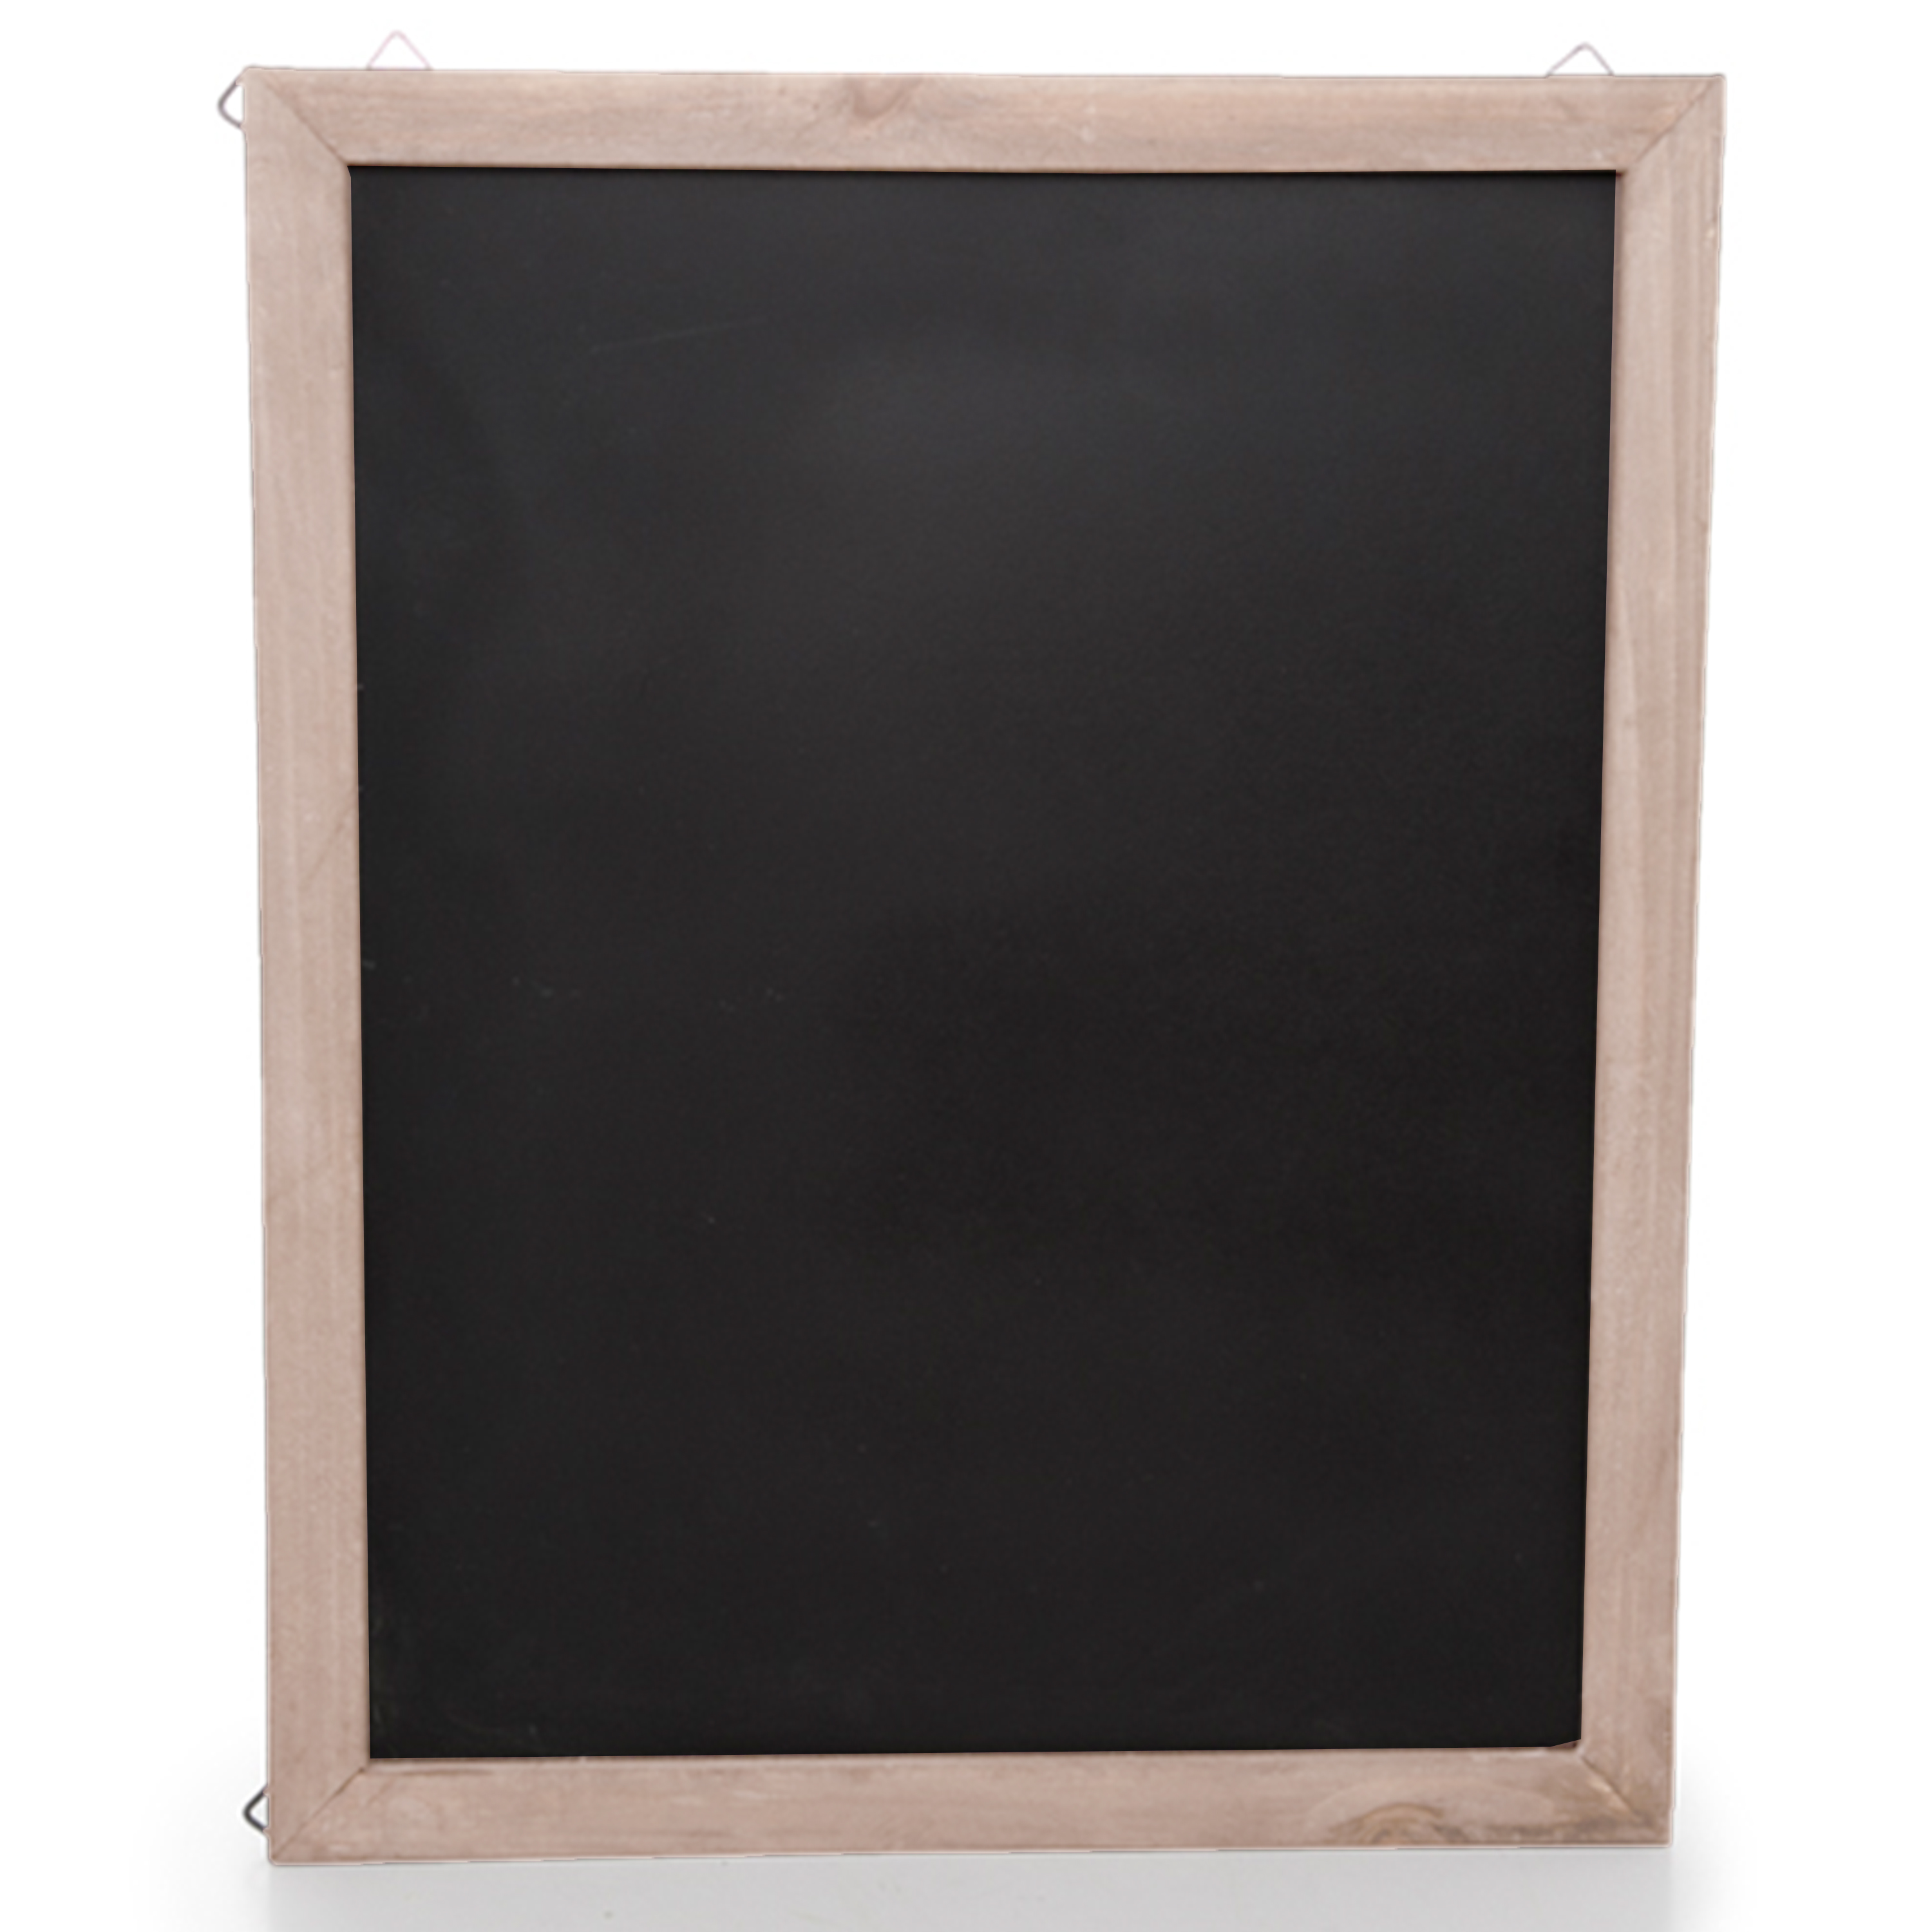 Wooden Chalkboard Display Sign for Wall - Medium Wide 17in